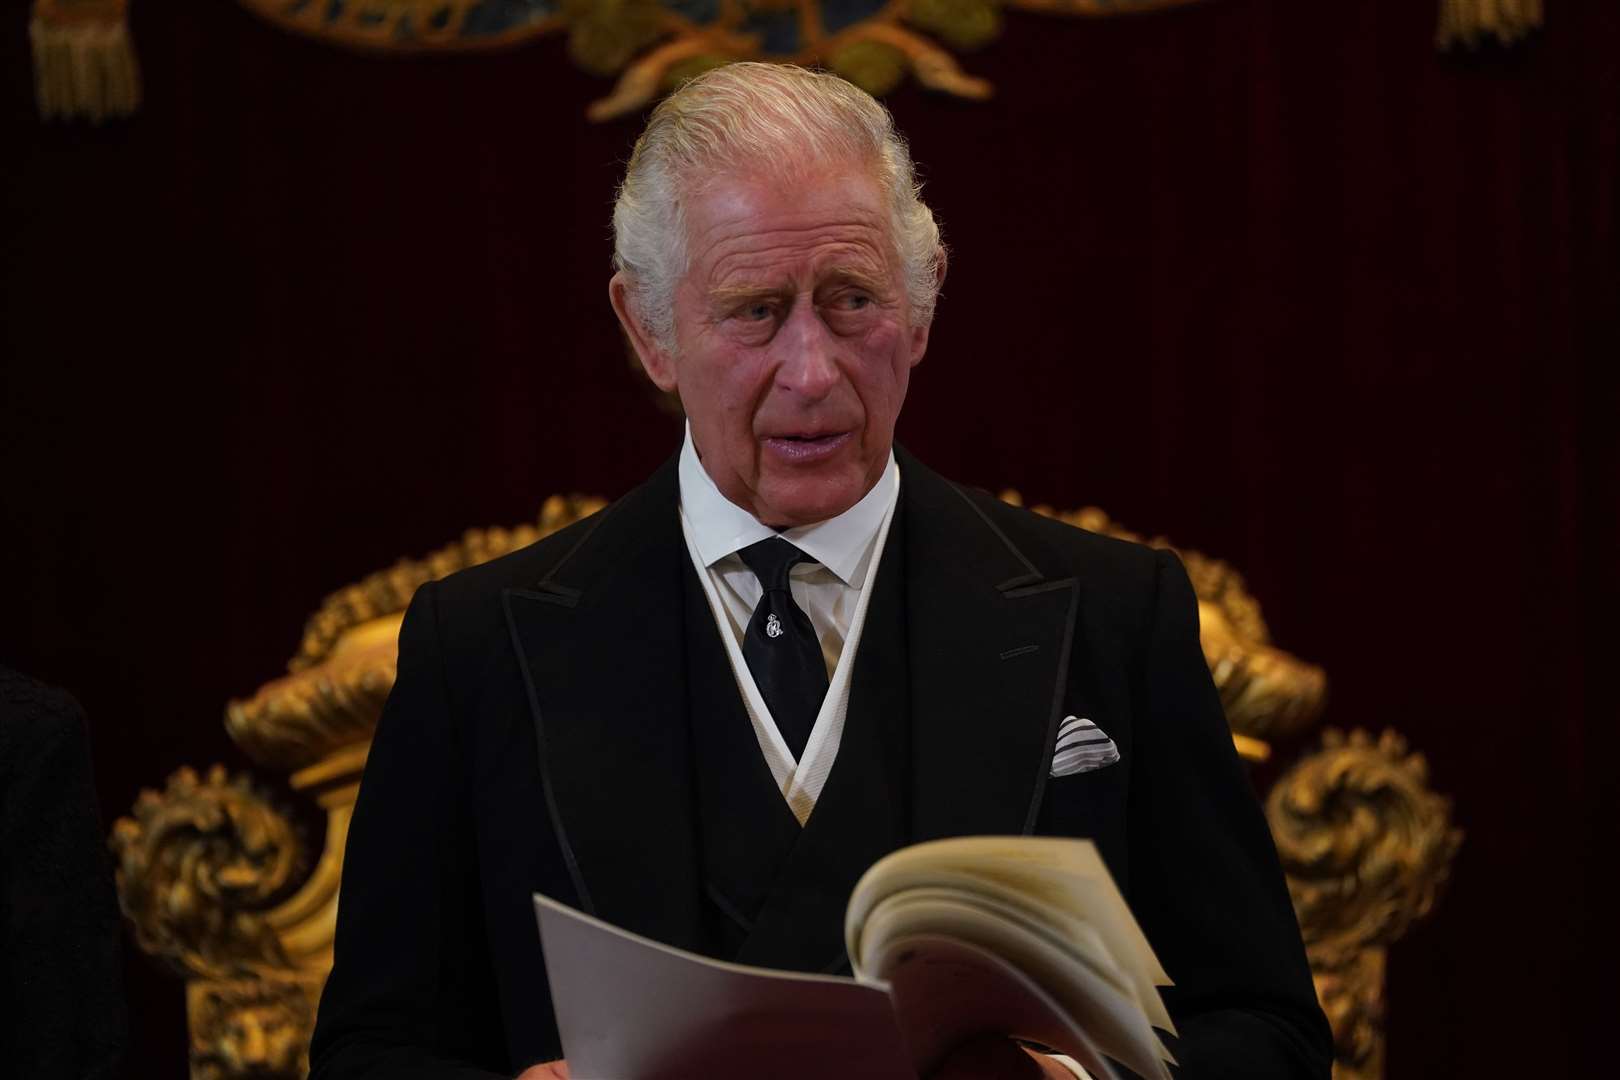 King Charles III during the Accession Council at St James’s Palace (Victoria Jones/PA)